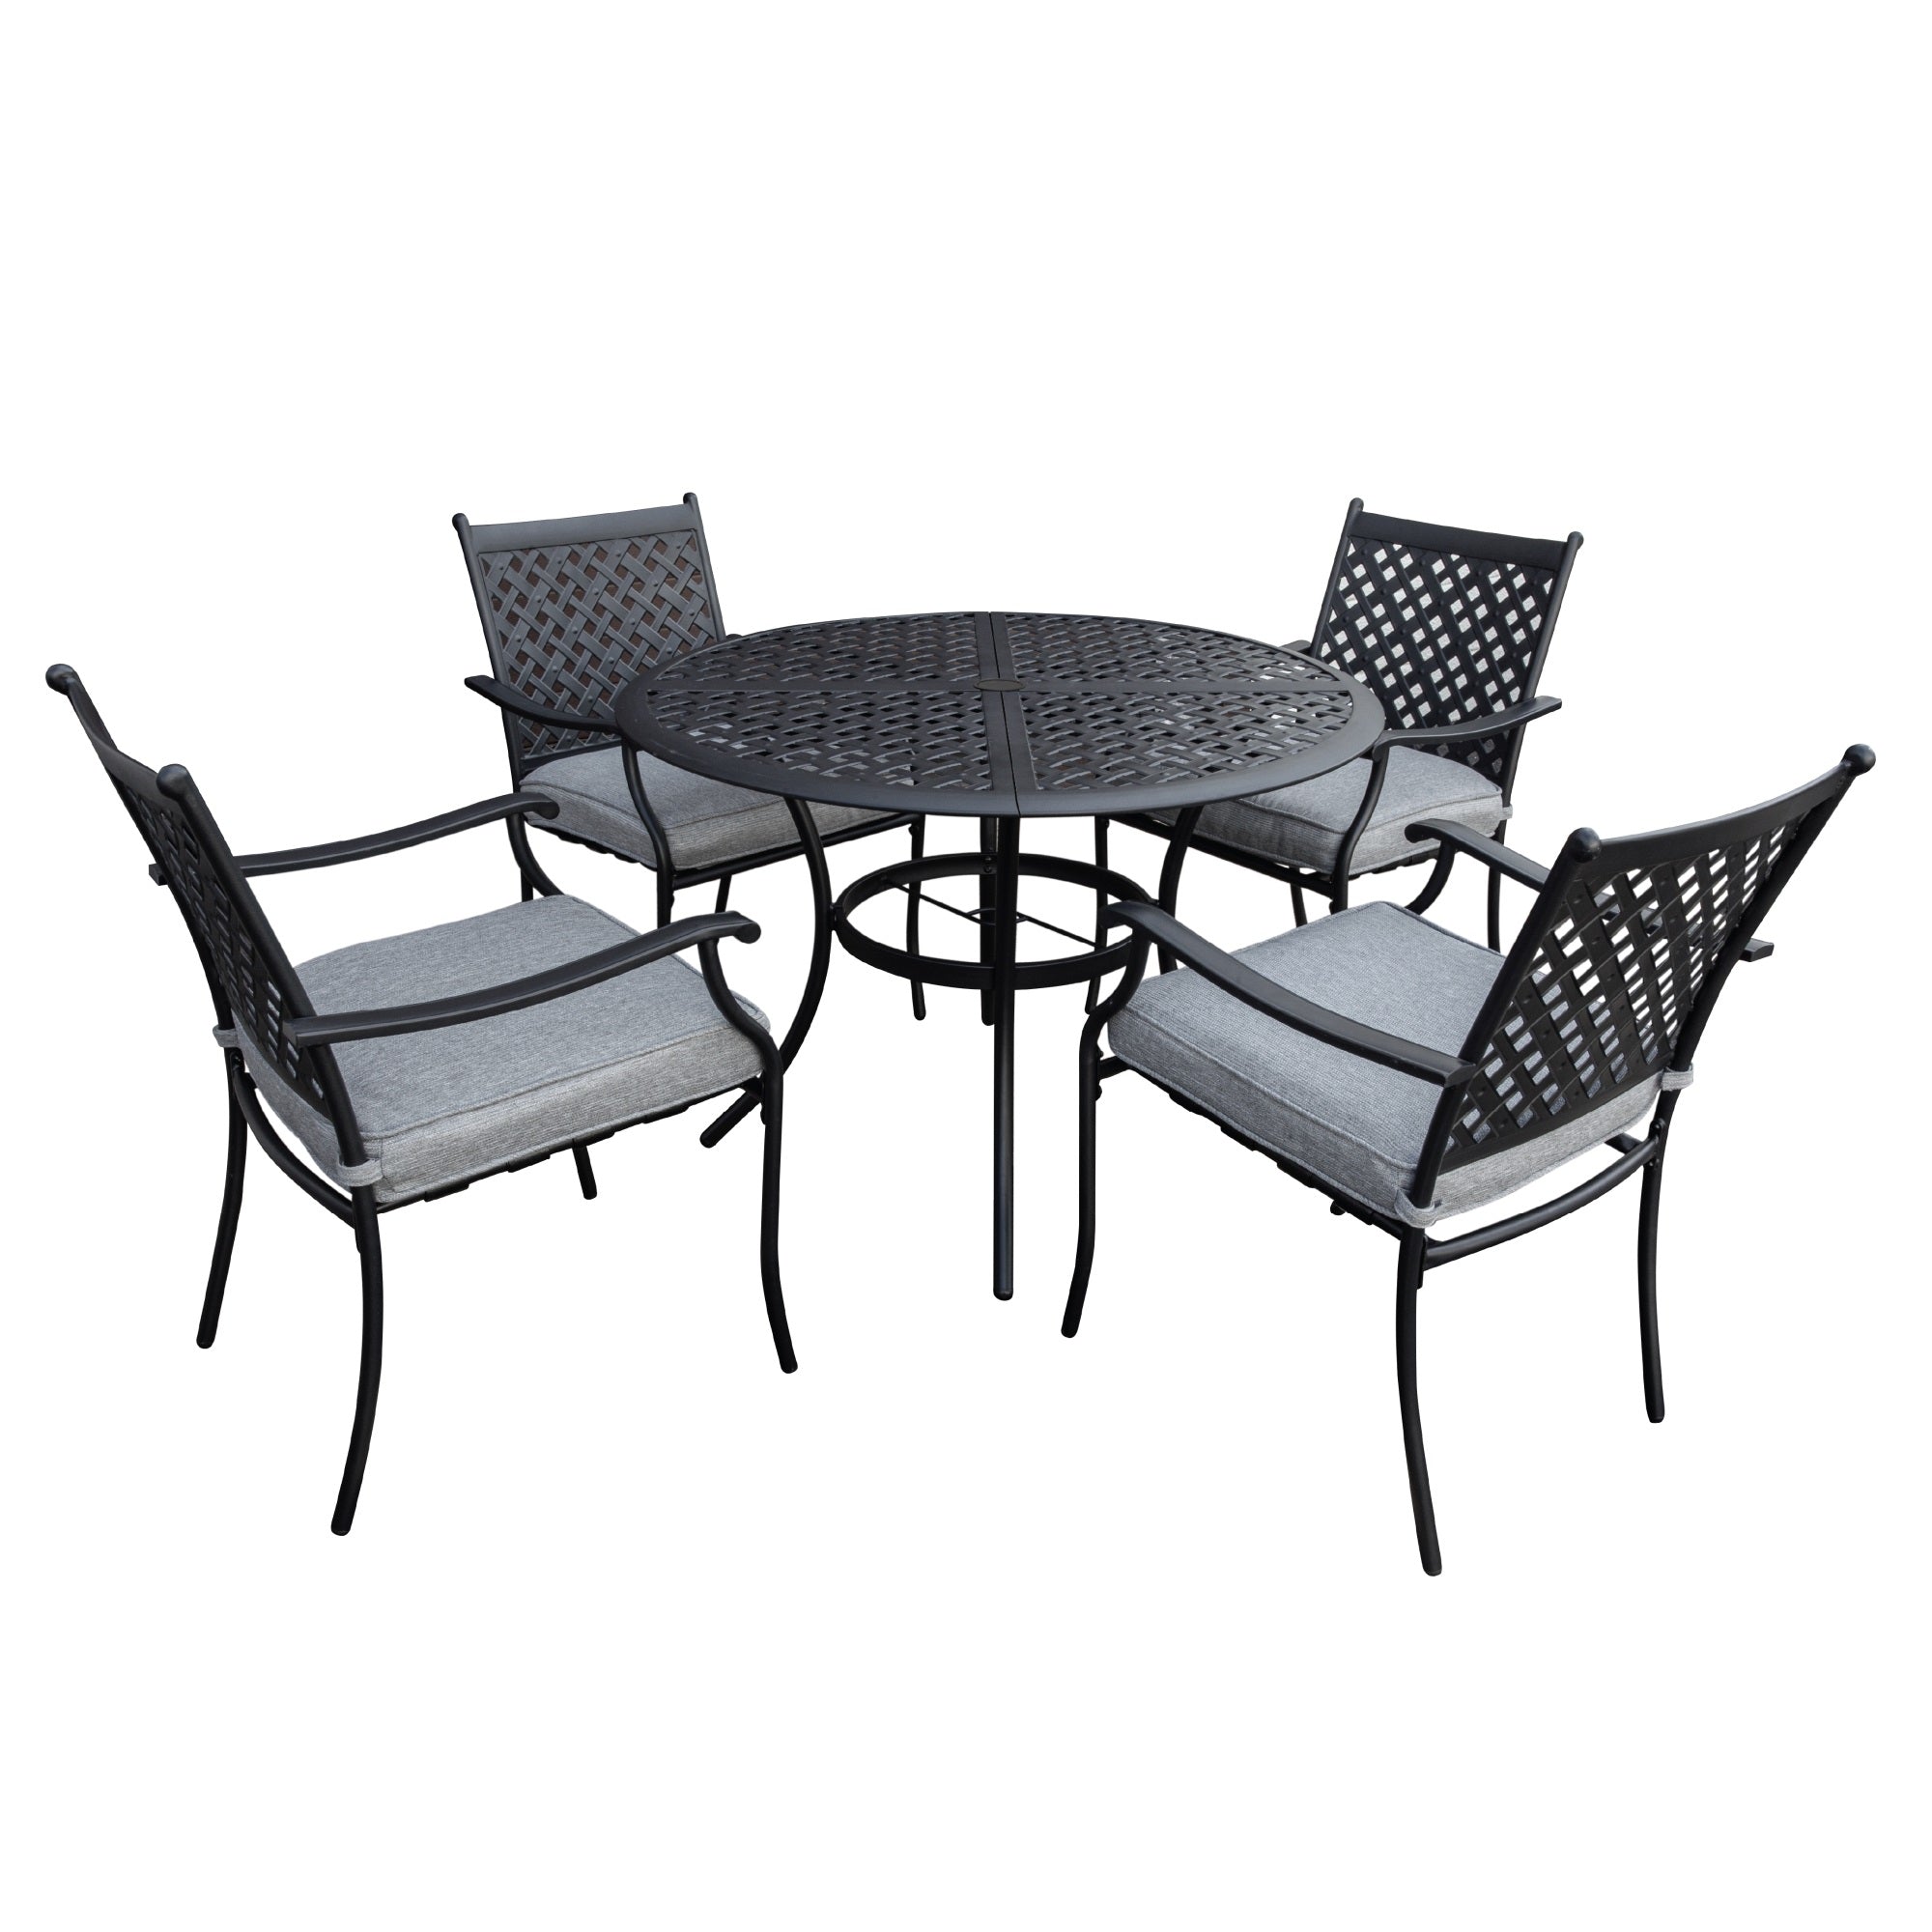 Garden Elements Outdoor Patio Set Metal Dining Furniture w/ Iron Armrest Grey Cushioned Chairs and Steel Round Table For Patios, Decks, Black, 5 Piece